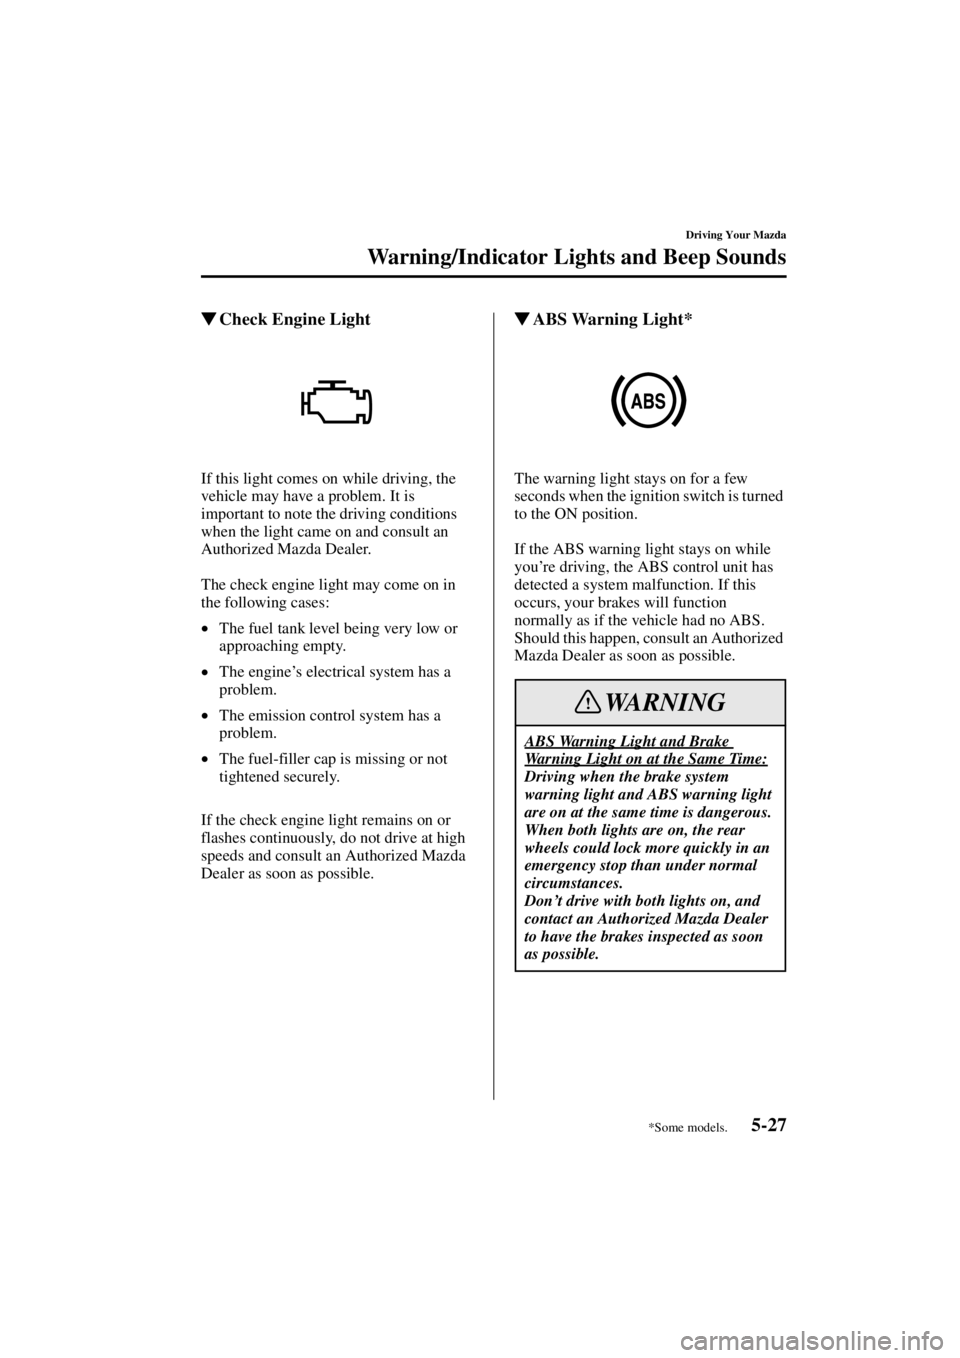 MAZDA MODEL SPEED MX-5 MIATA 2004  Owners Manual 5-27
Driving Your Mazda
Warning/Indicator Lights and Beep Sounds
Form No. 8T02-EA-03L
Check Engine Light
If this light comes on while driving, the 
vehicle may have a problem. It is 
important to not